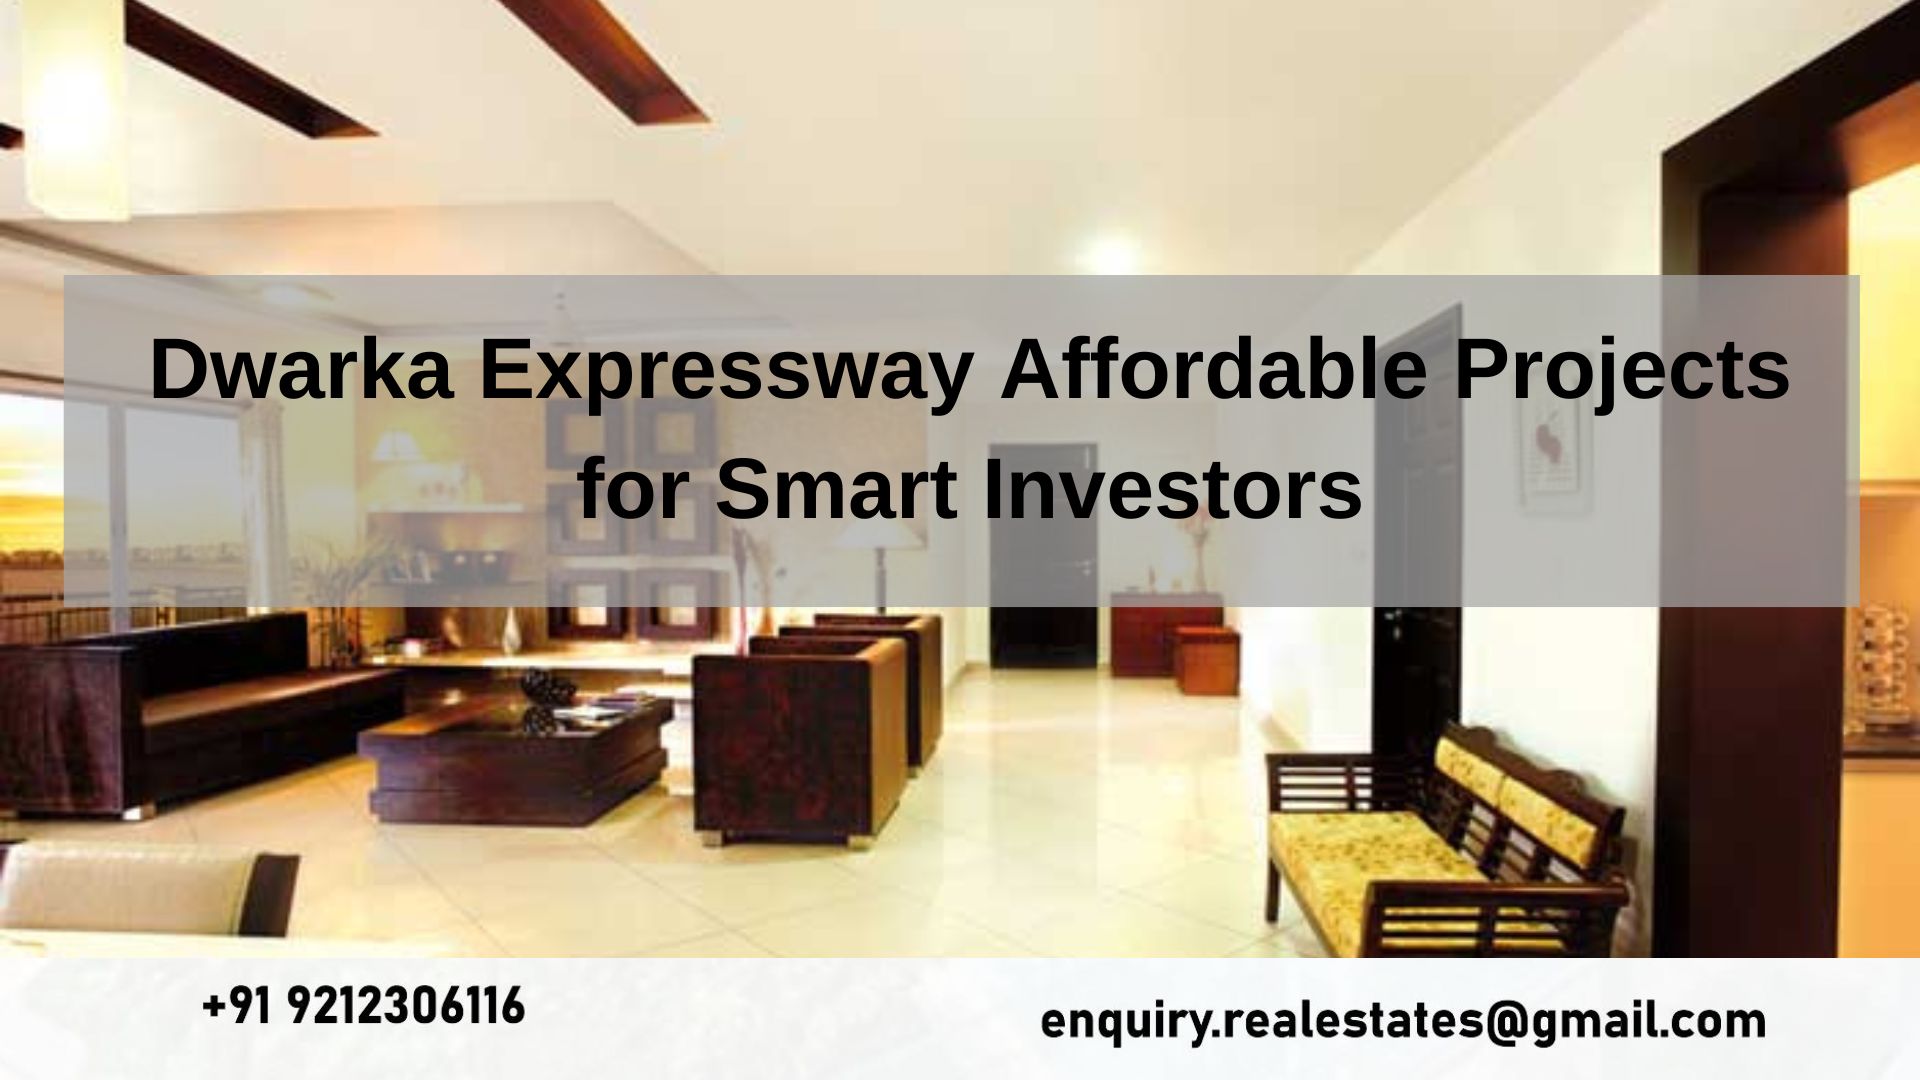 Dwarka Expressway Affordable Projects for Smart Investors